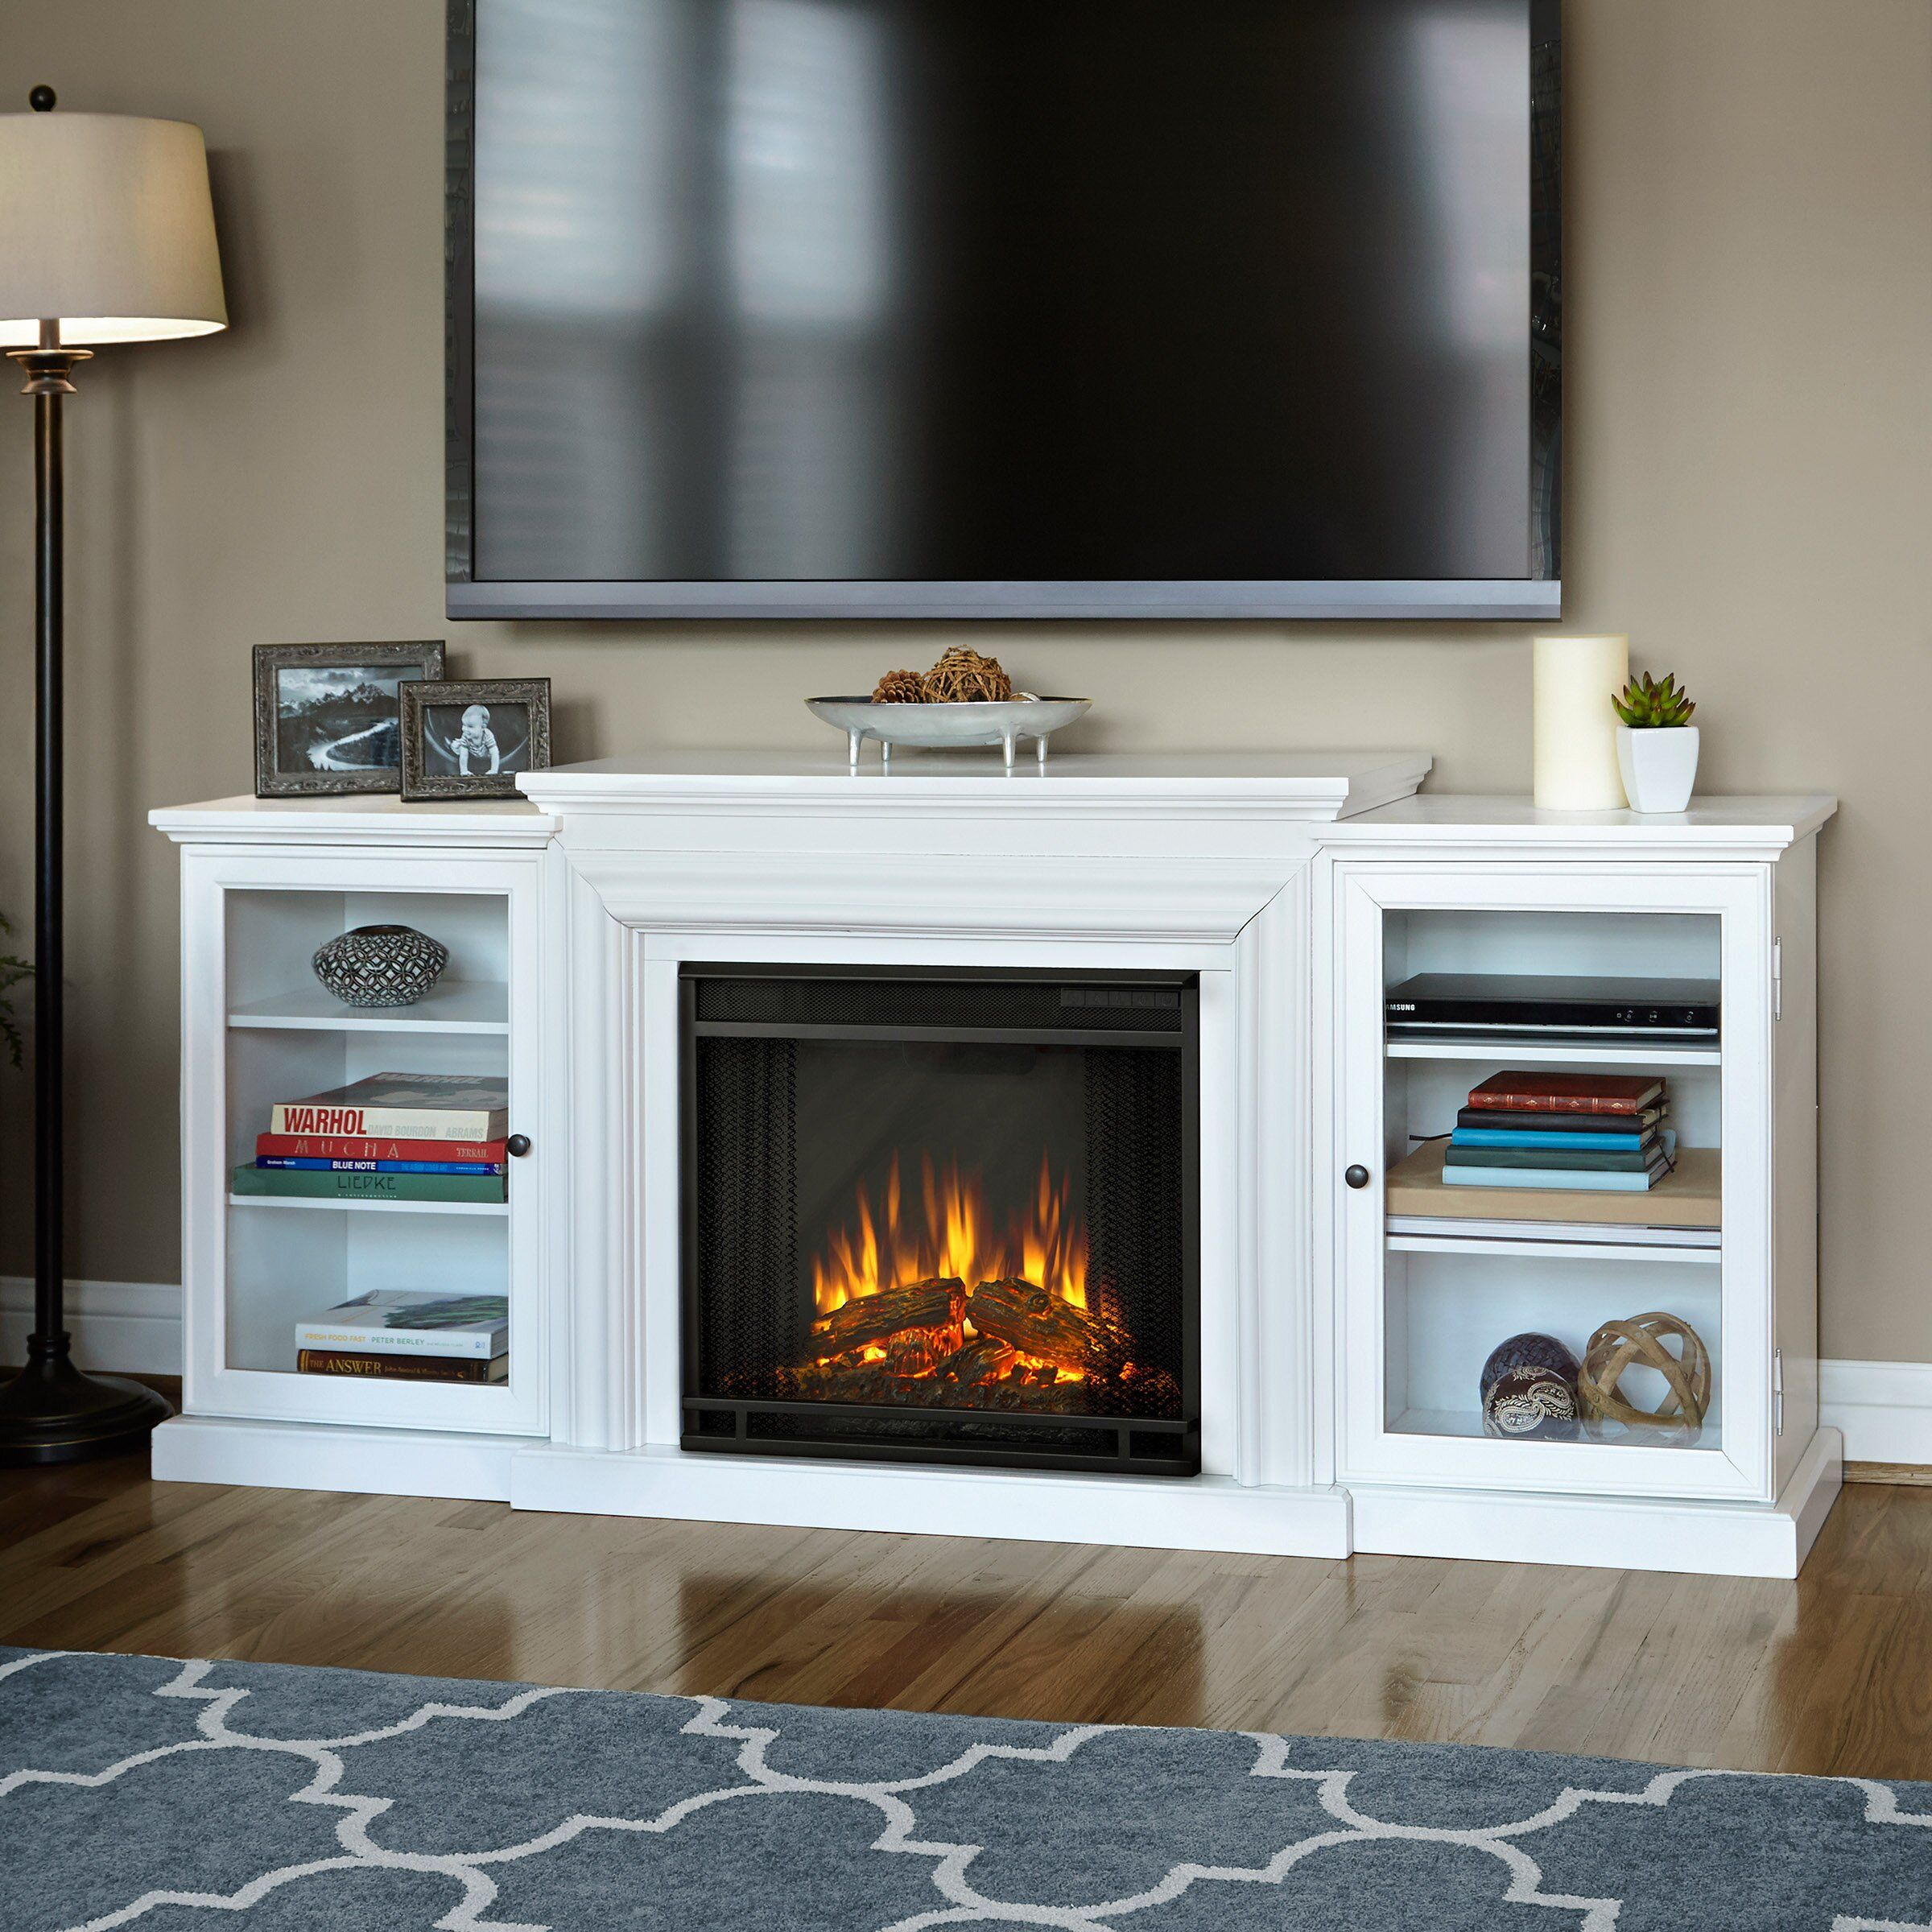 Real Flame Frederick Tv Stand With Electric Fireplace & Reviews | Wayfair Within Tv Stands With Electric Fireplace (Gallery 4 of 20)